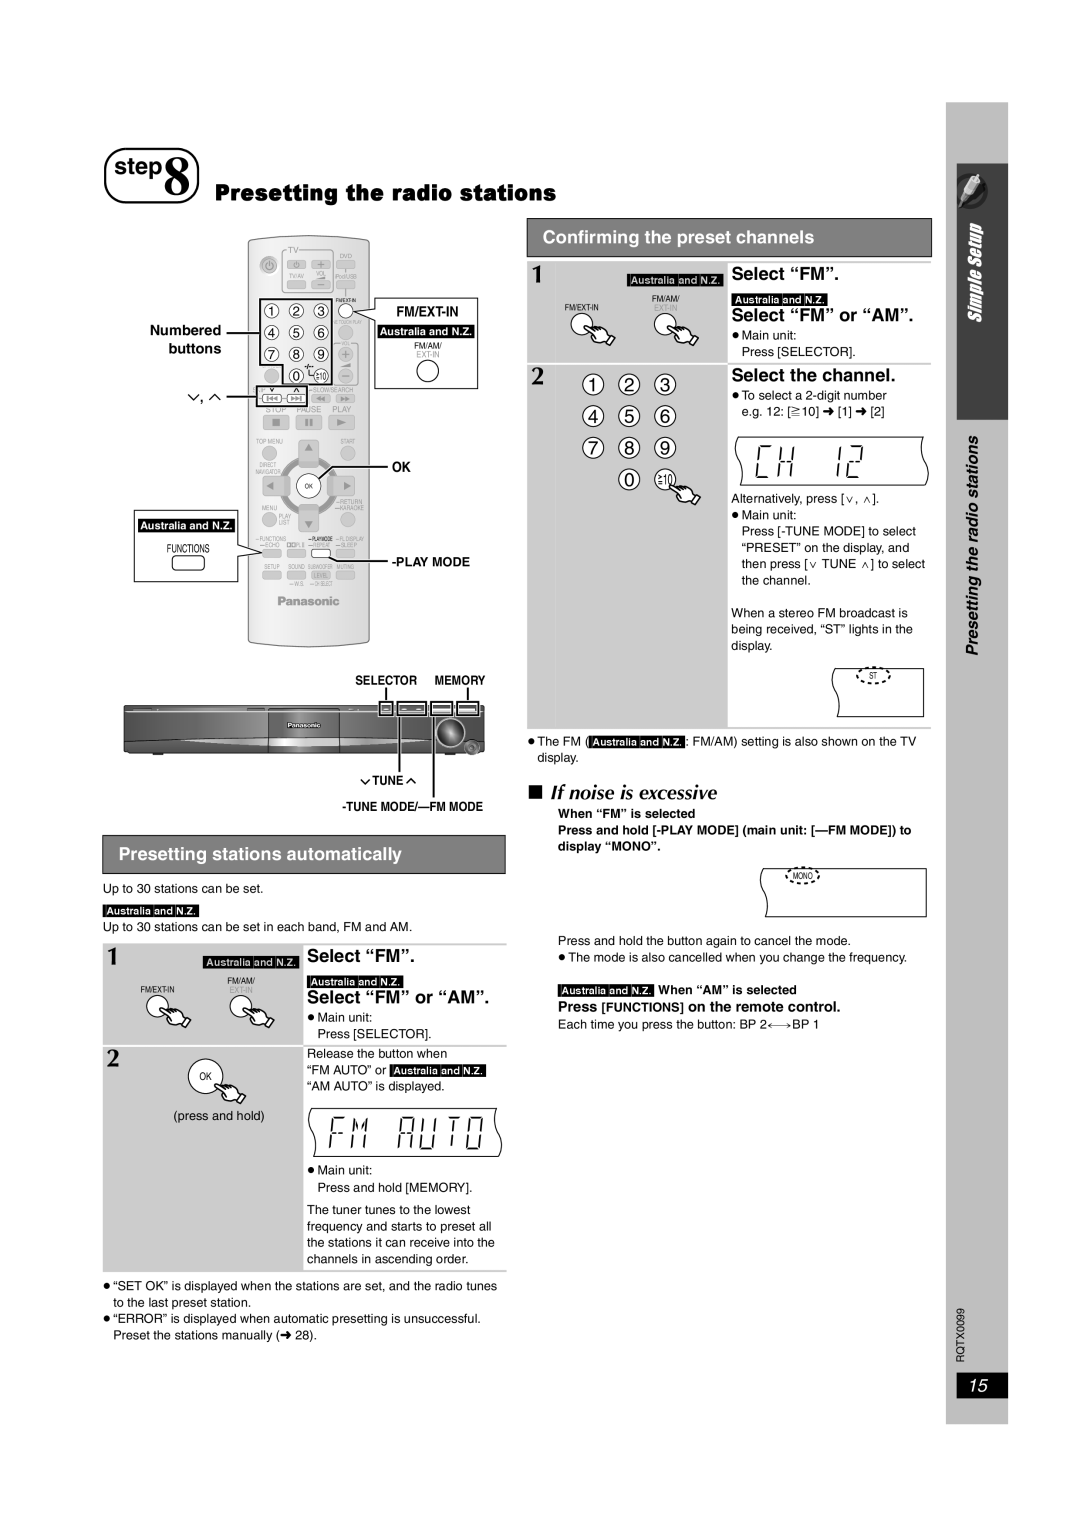 Panasonic SC-PT565 Presetting the radio stations, ∫If noise is excessive, 2 1 2 4 5, Confirming the preset channels, Setup 